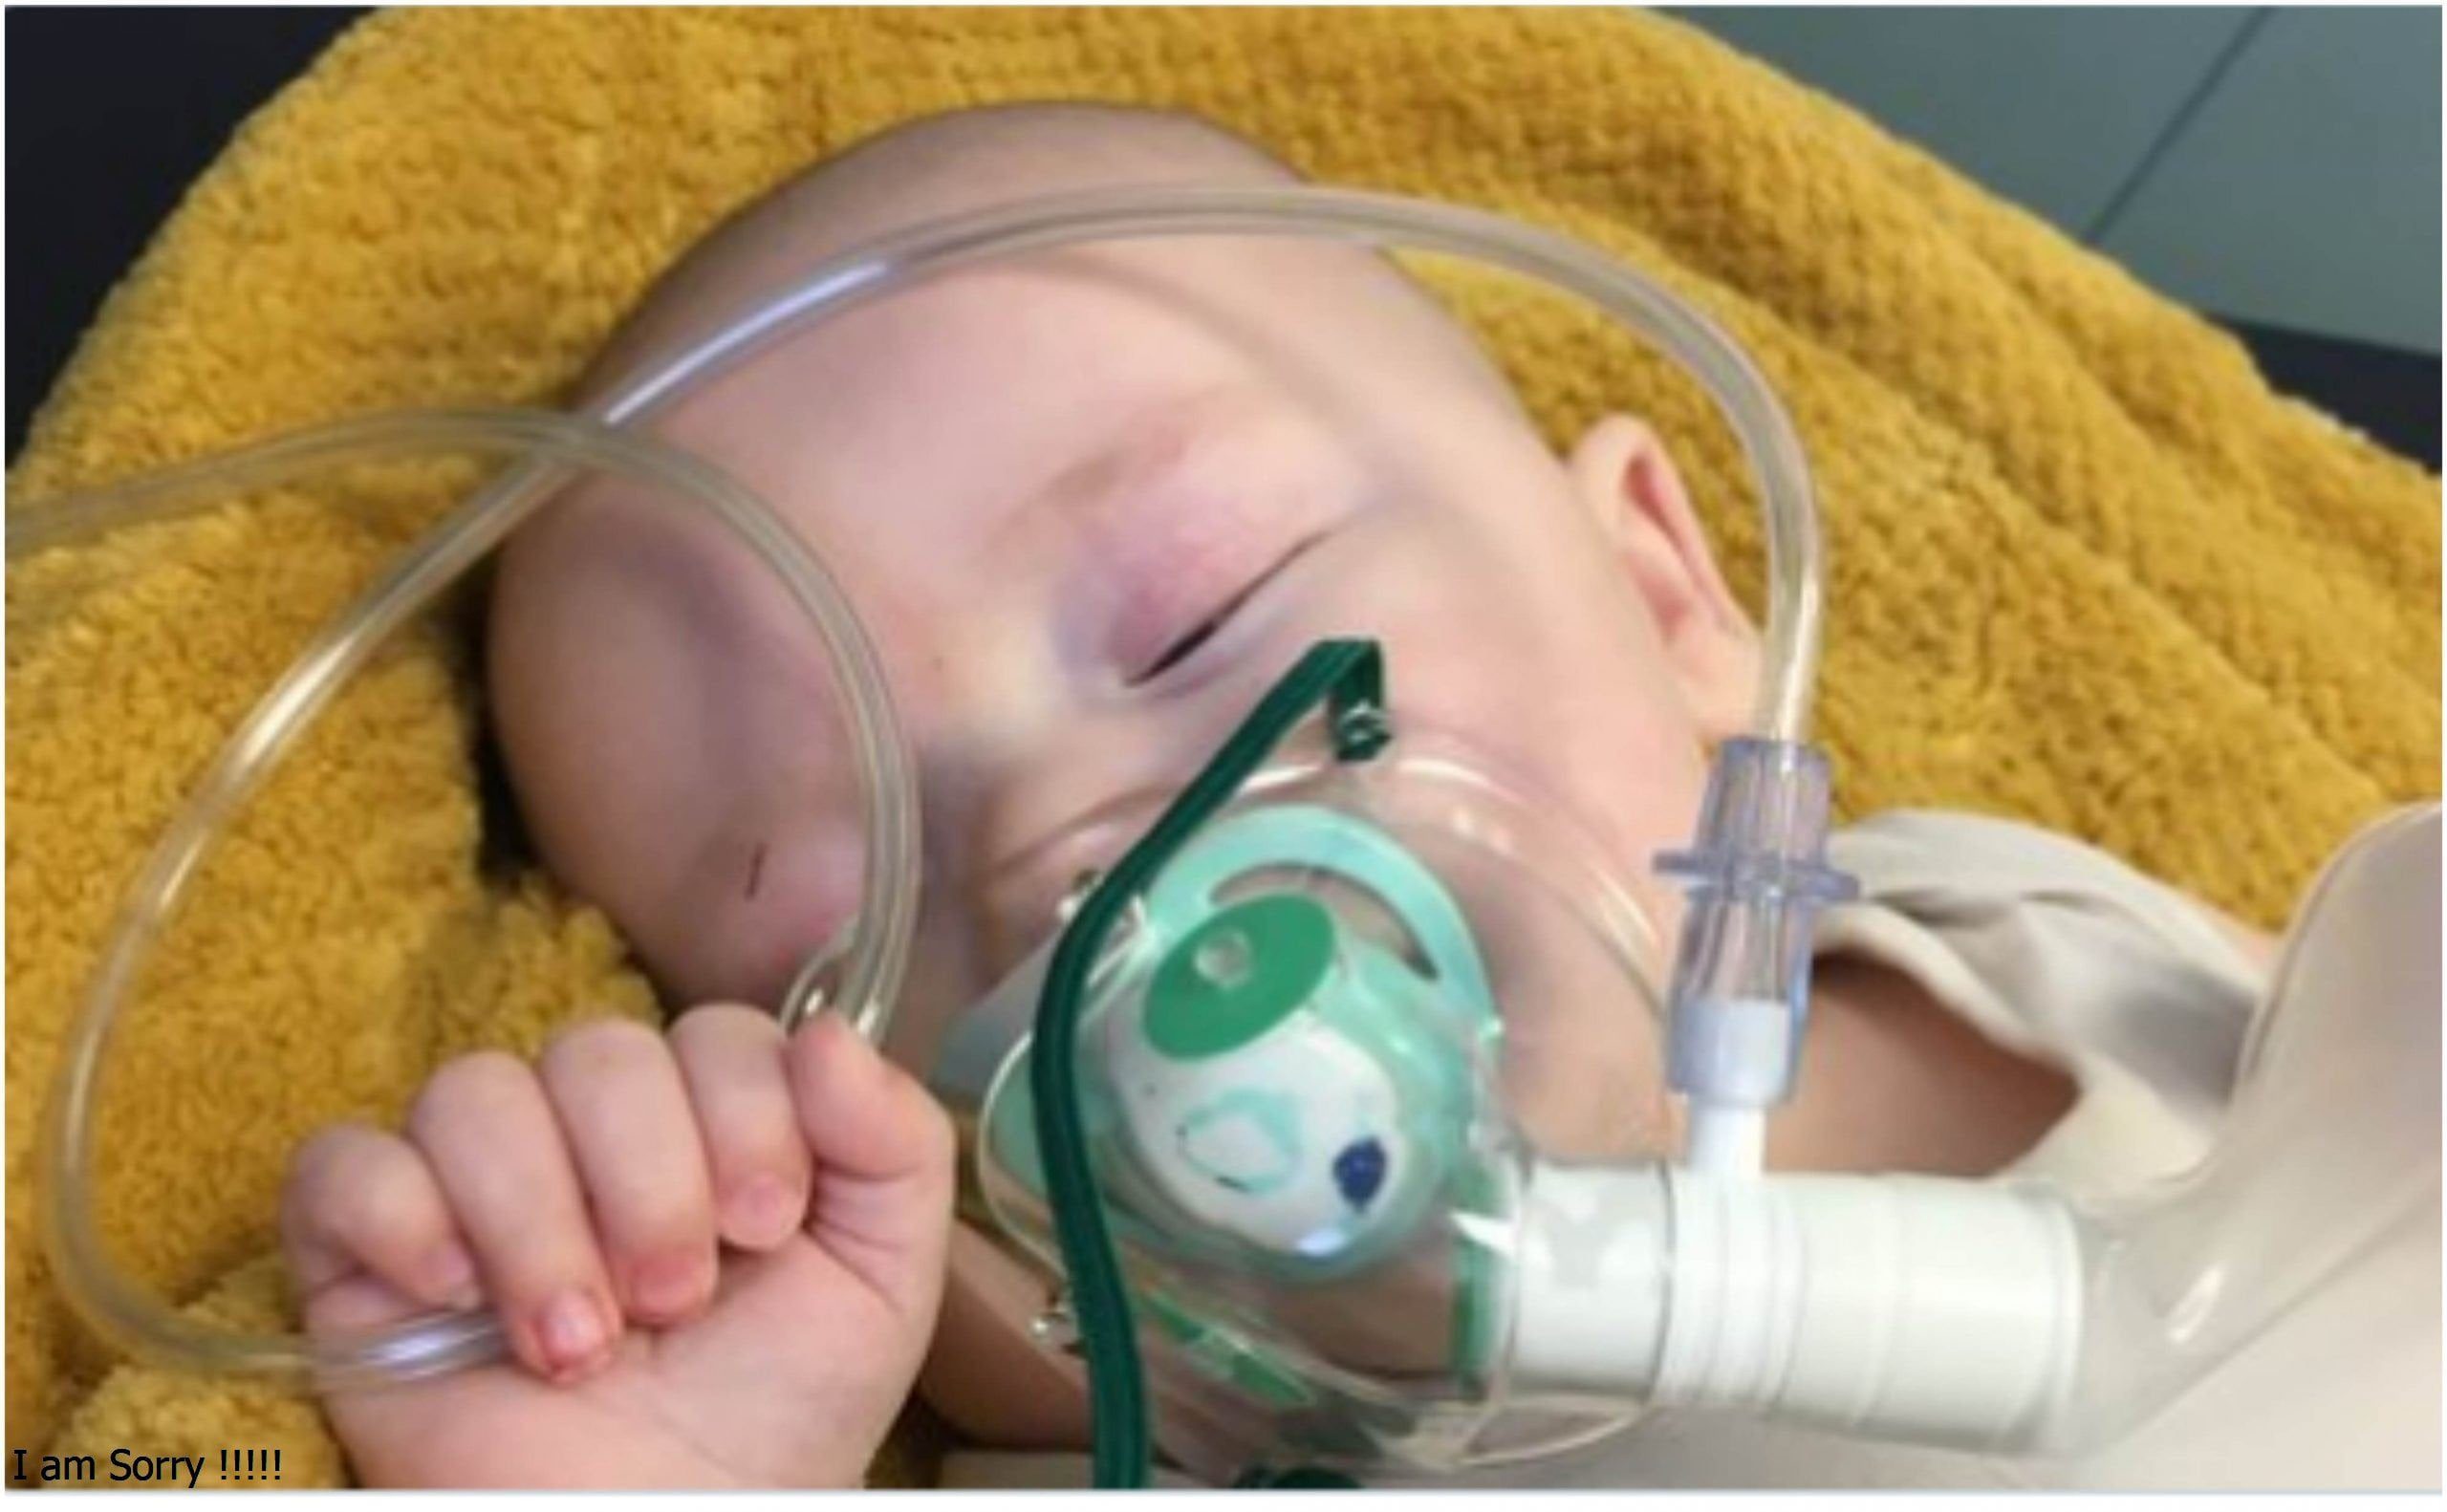 Another newly born baby battles for his life after testing positive to coronavirus.